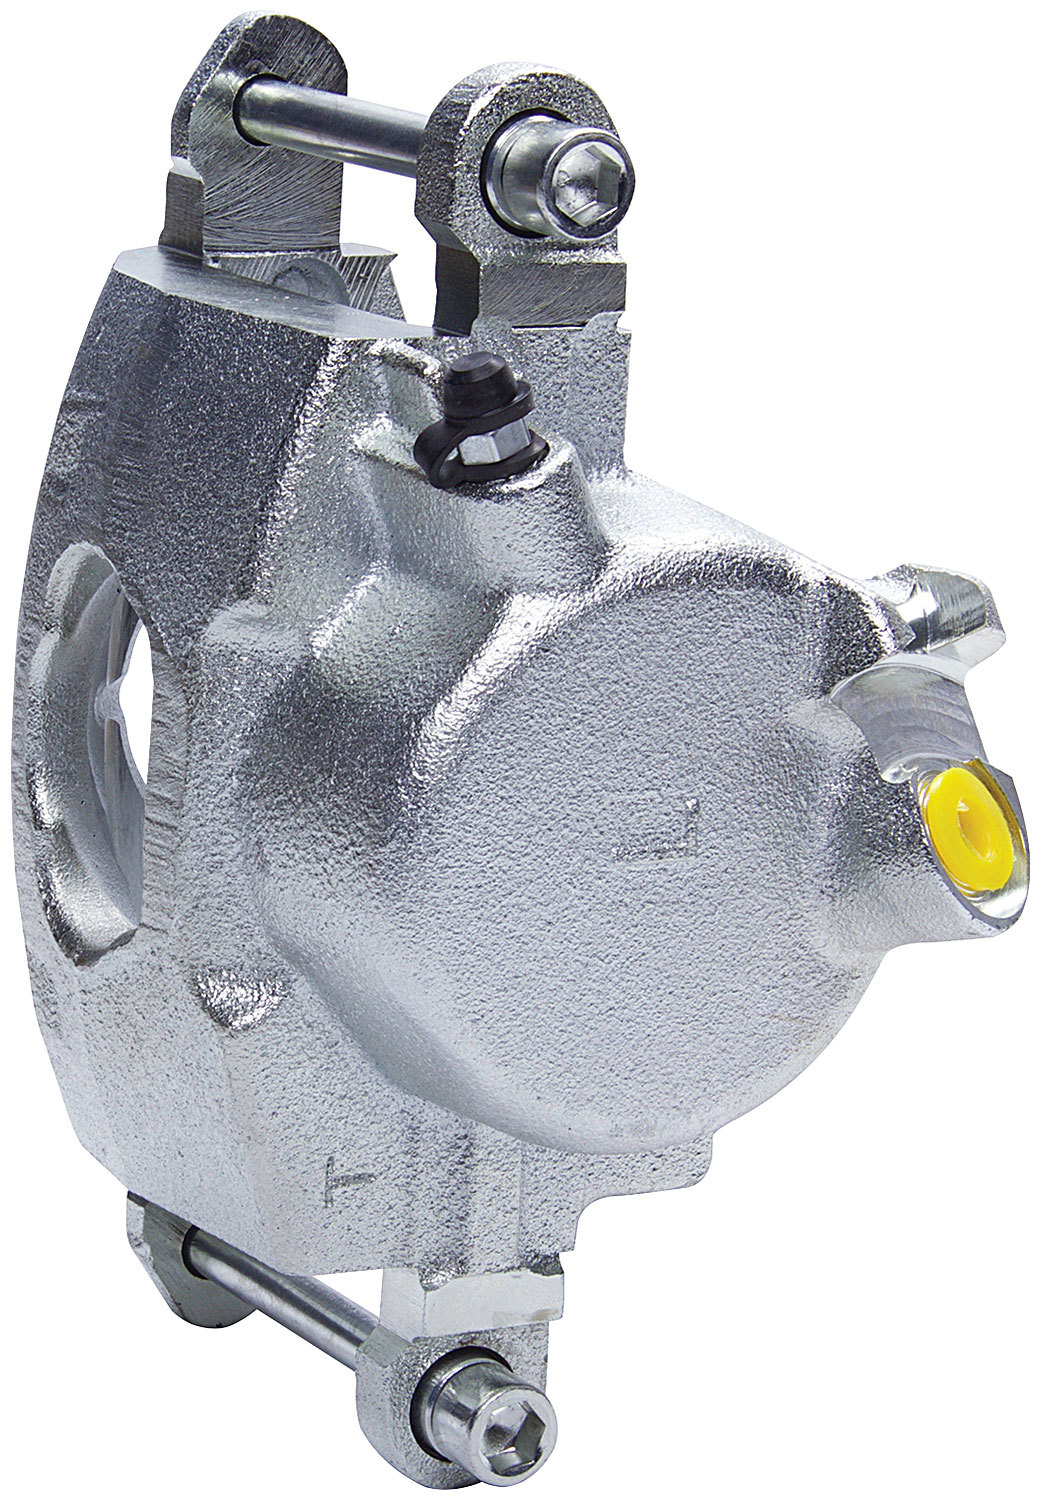 Allstar Performance 42082 Brake Caliper, Driver Side, Large GM, 1 Piston, Cast Iron, Natural, 2.813 in Bore, 1.000 in Thick Rotor Maximum, 7.060 Floating Mount, Each